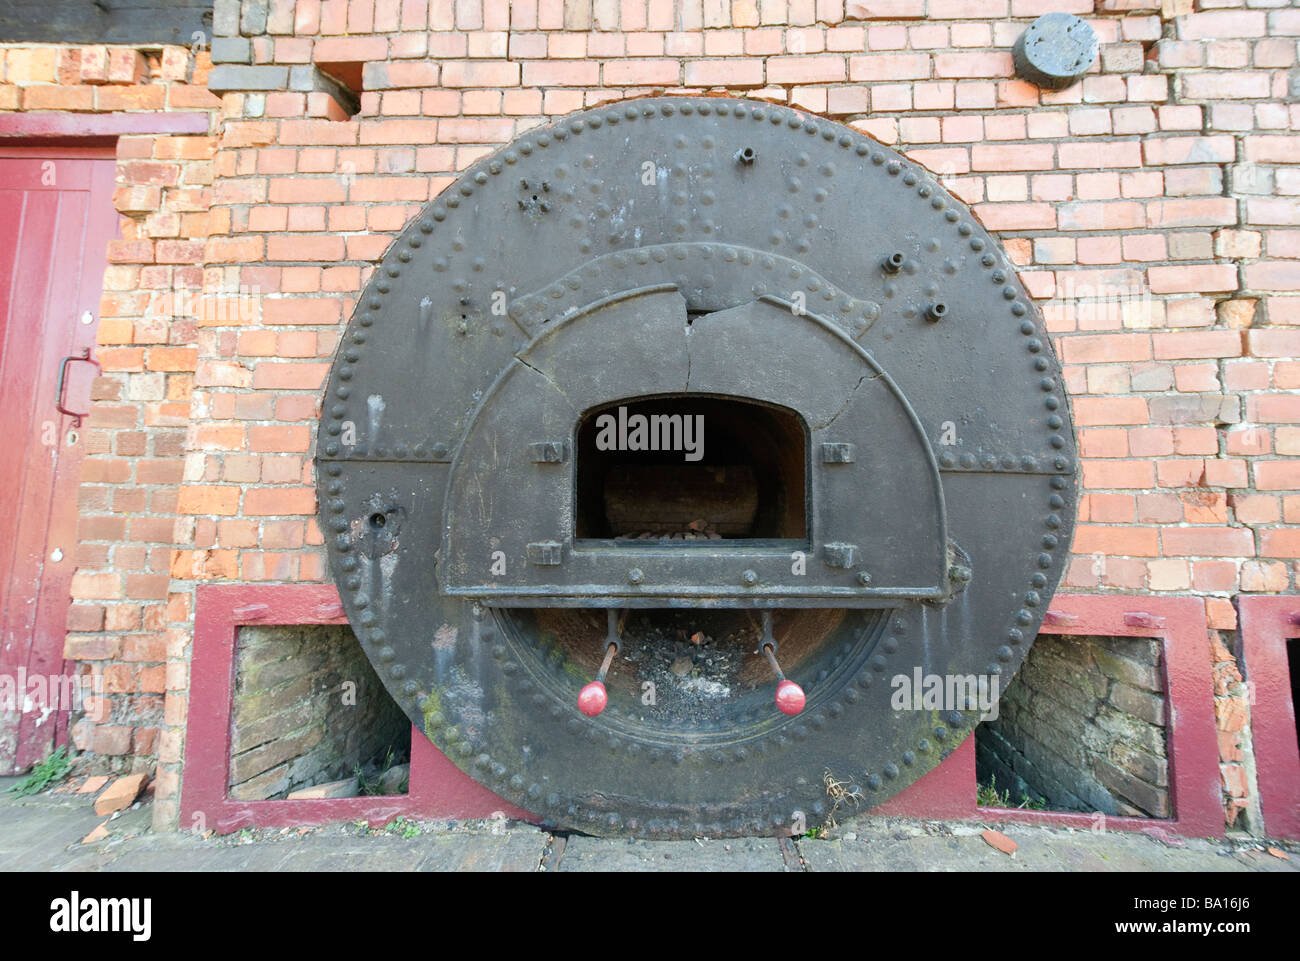 Furnace for the 'Water Boiler' for the steam engine 'Middleton Top', Derbyshire, England, 'Great Britain', 'United Kingdom' Stock Photo